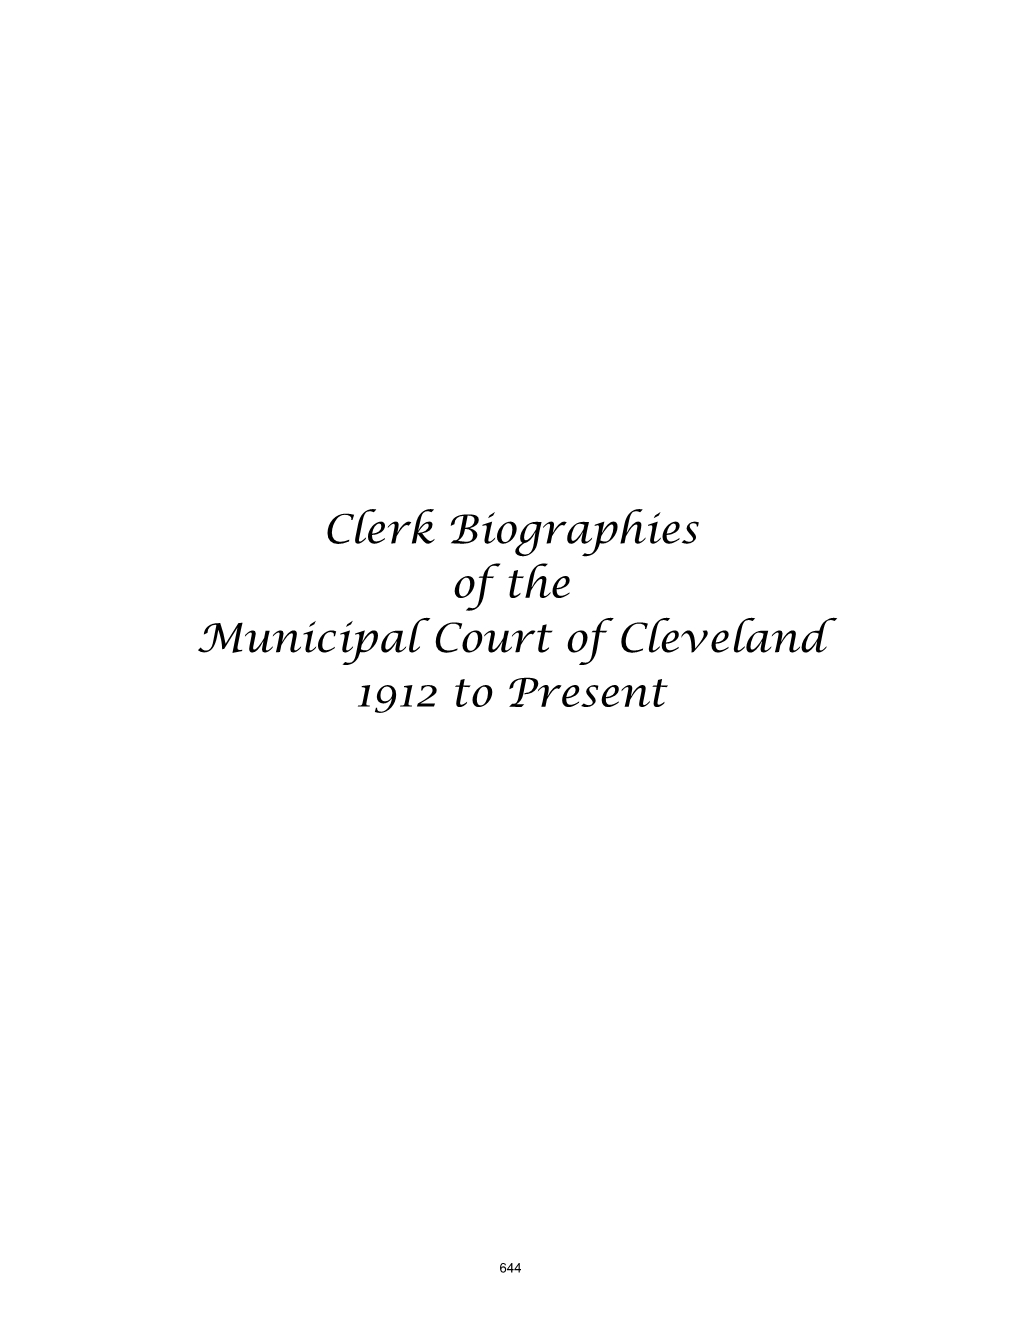 Clerk Biographies of the Municipal Court of Cleveland 1912 to Present